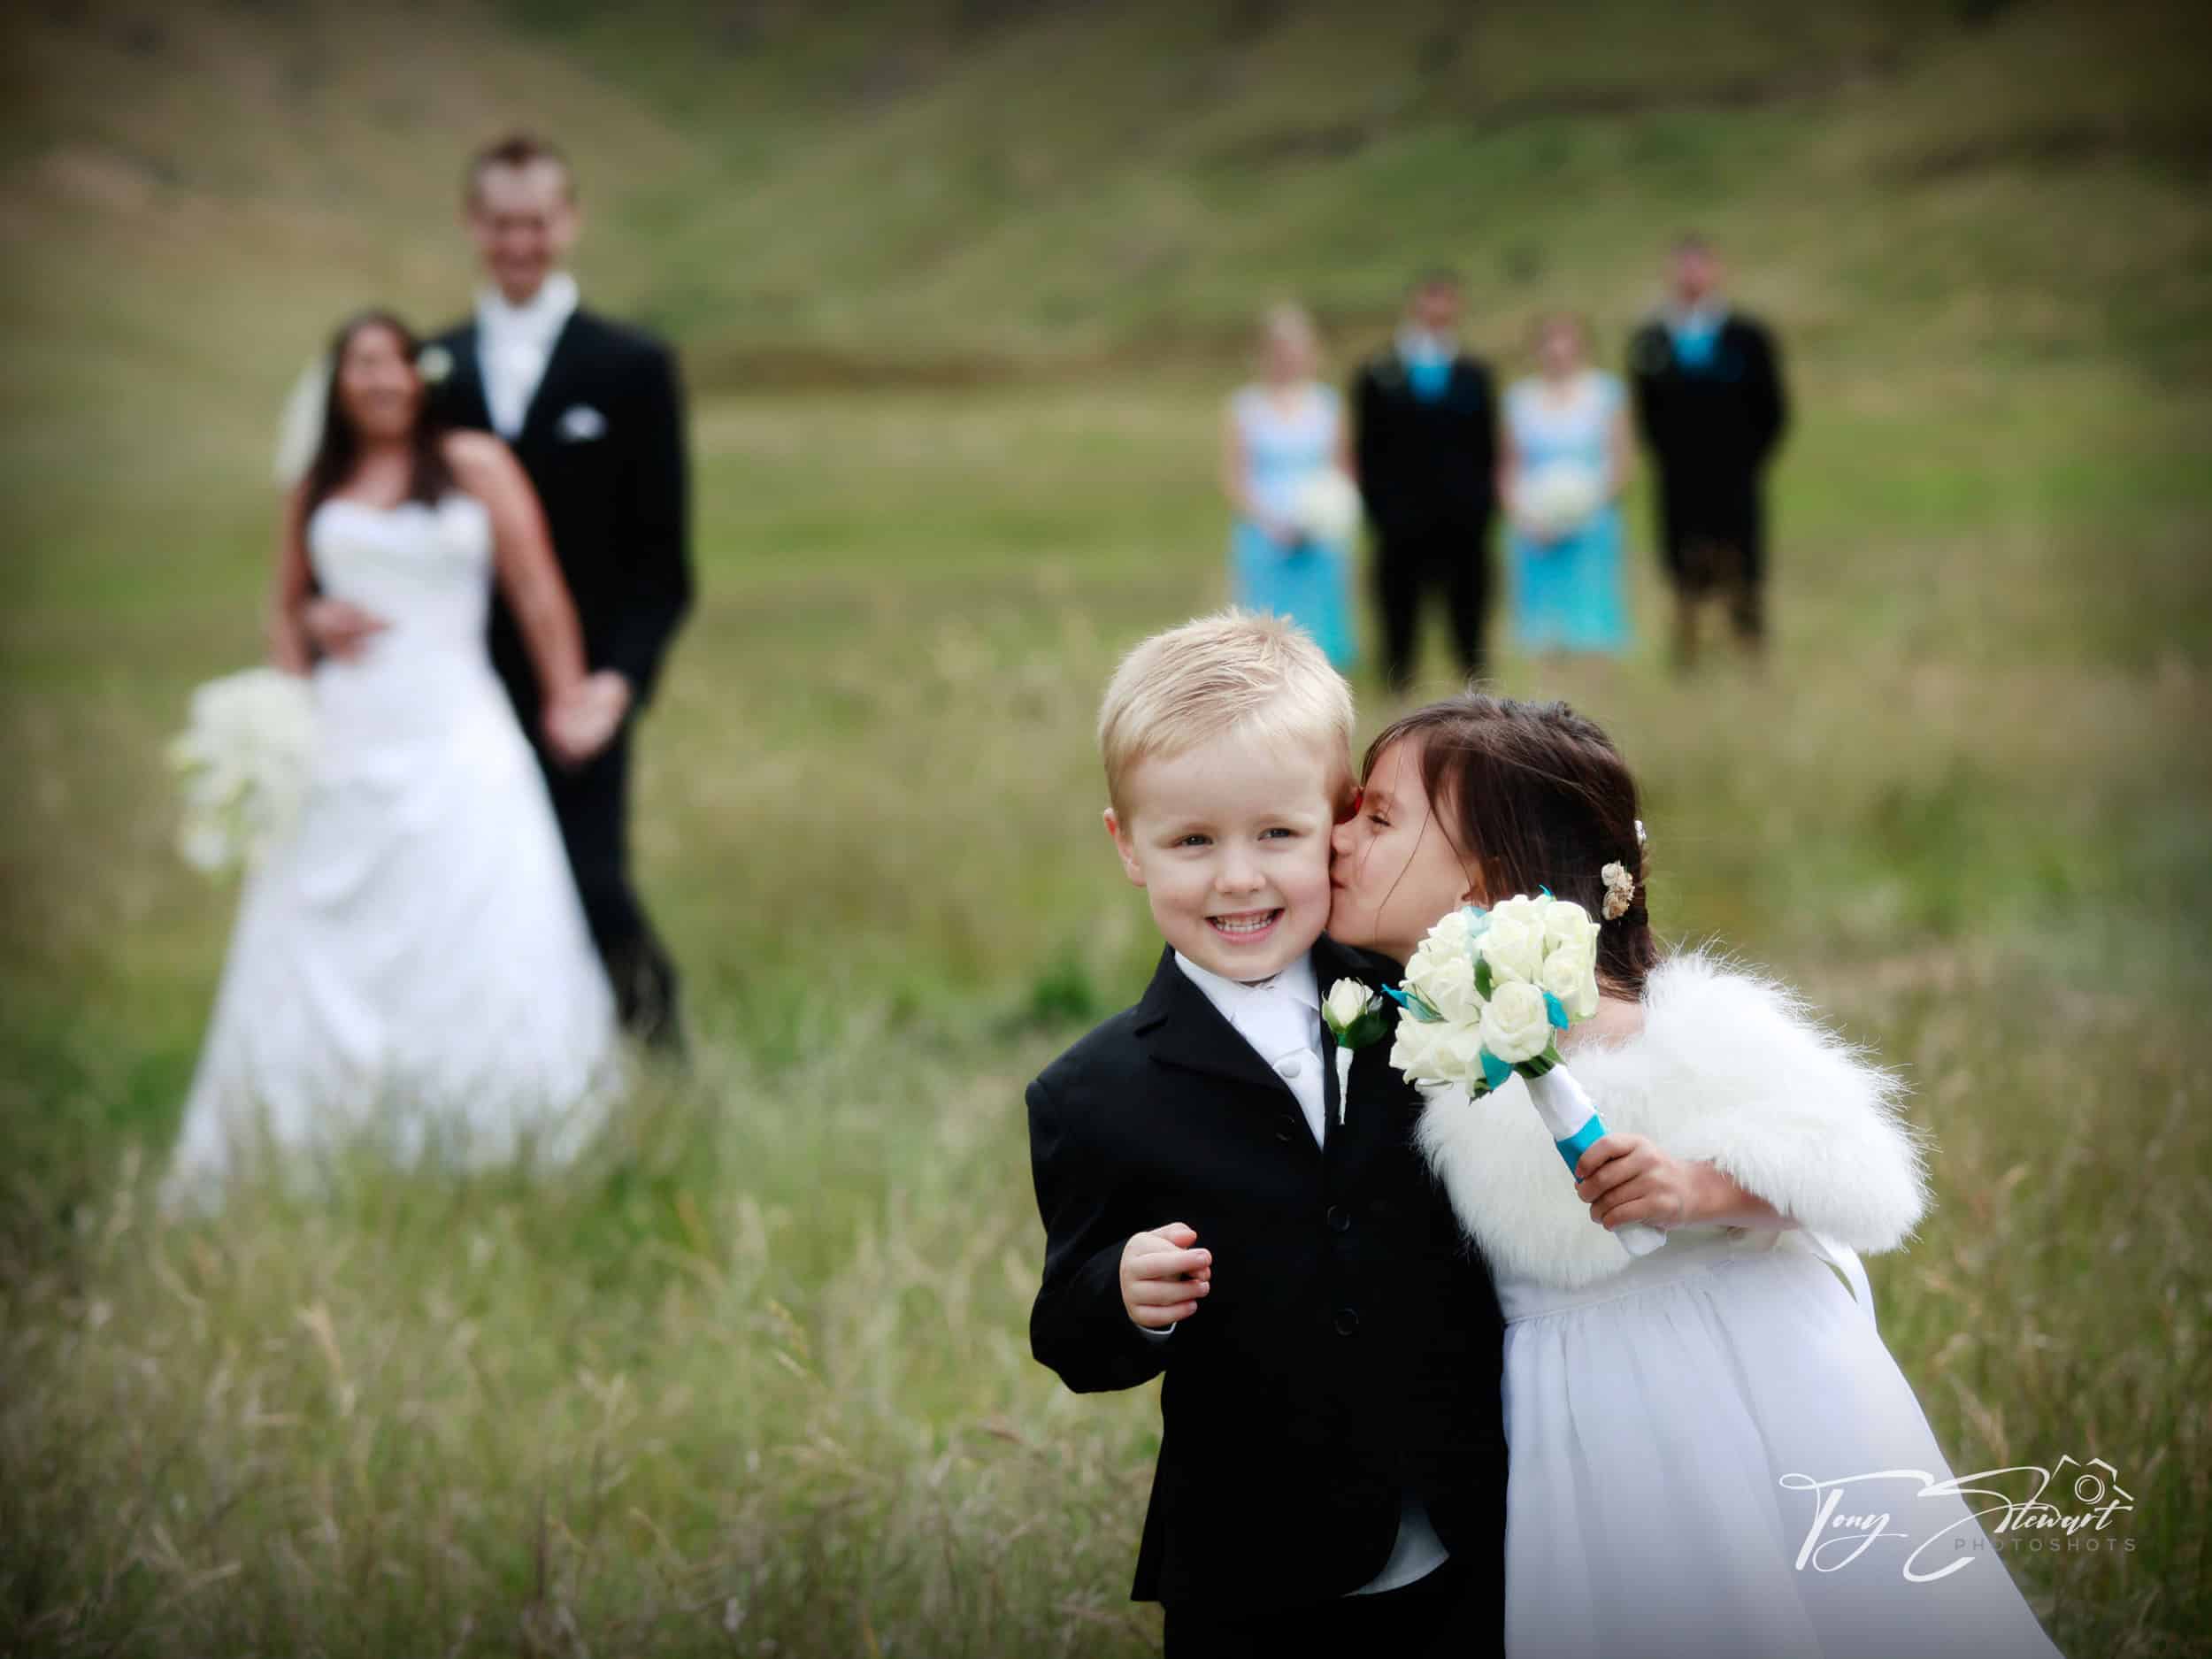 Cute page boy and girl replicate earlier kiss of bridal couple standing in a field.